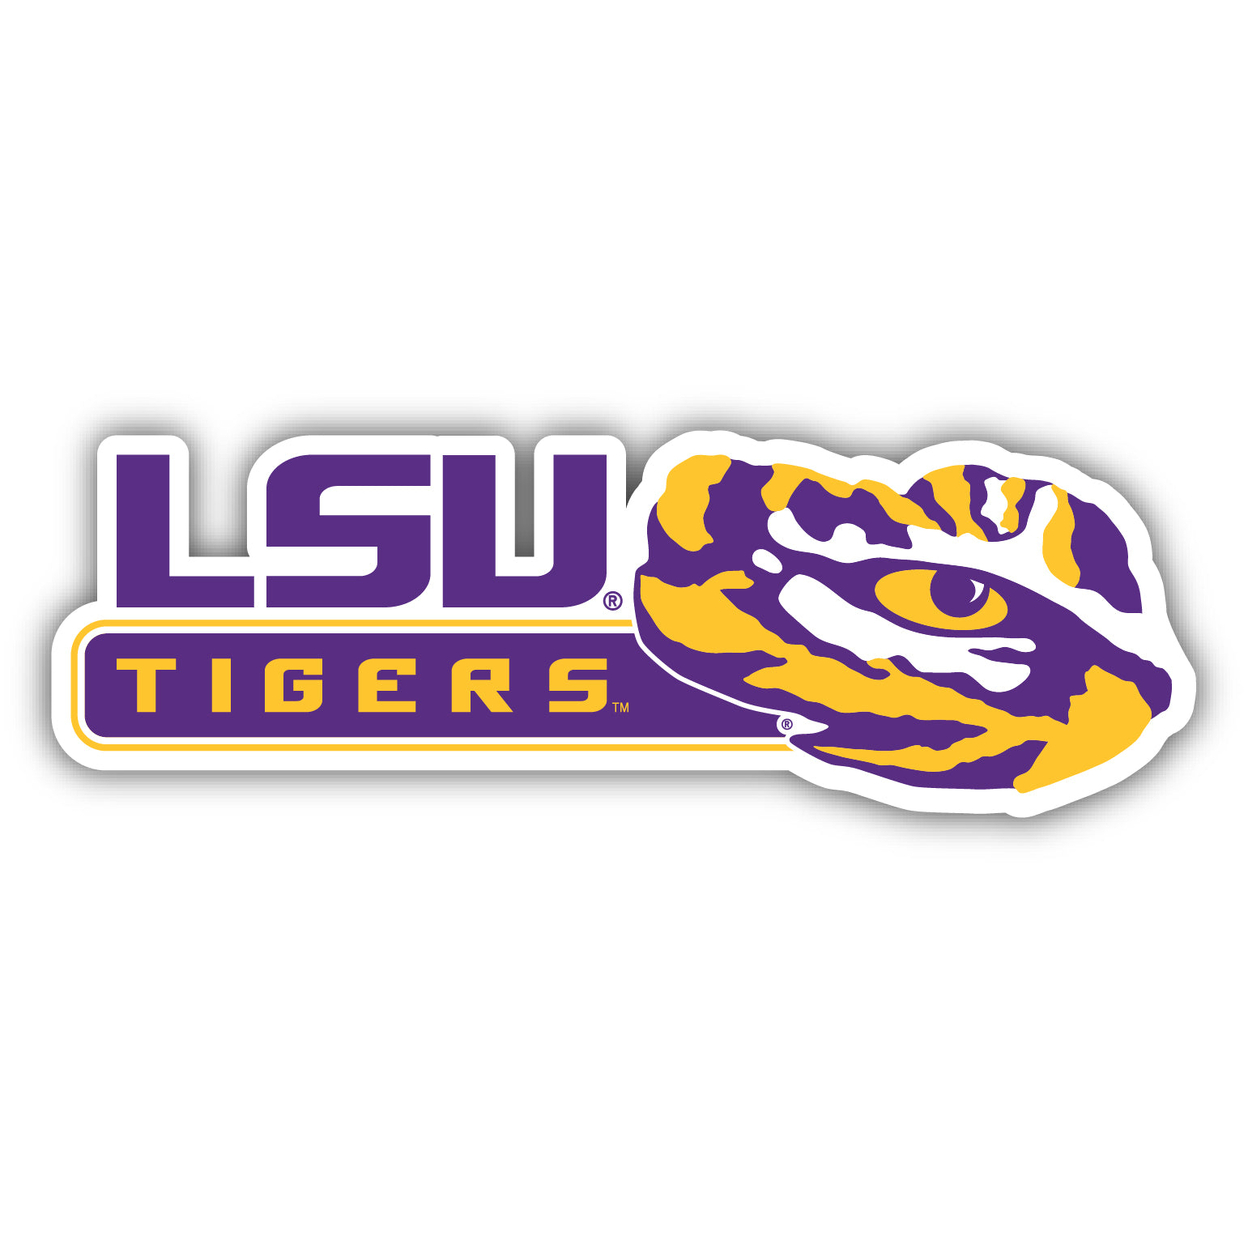 LSUÂ Tigers 4 Inch Wide Colorful Vinyl Decal Sticker